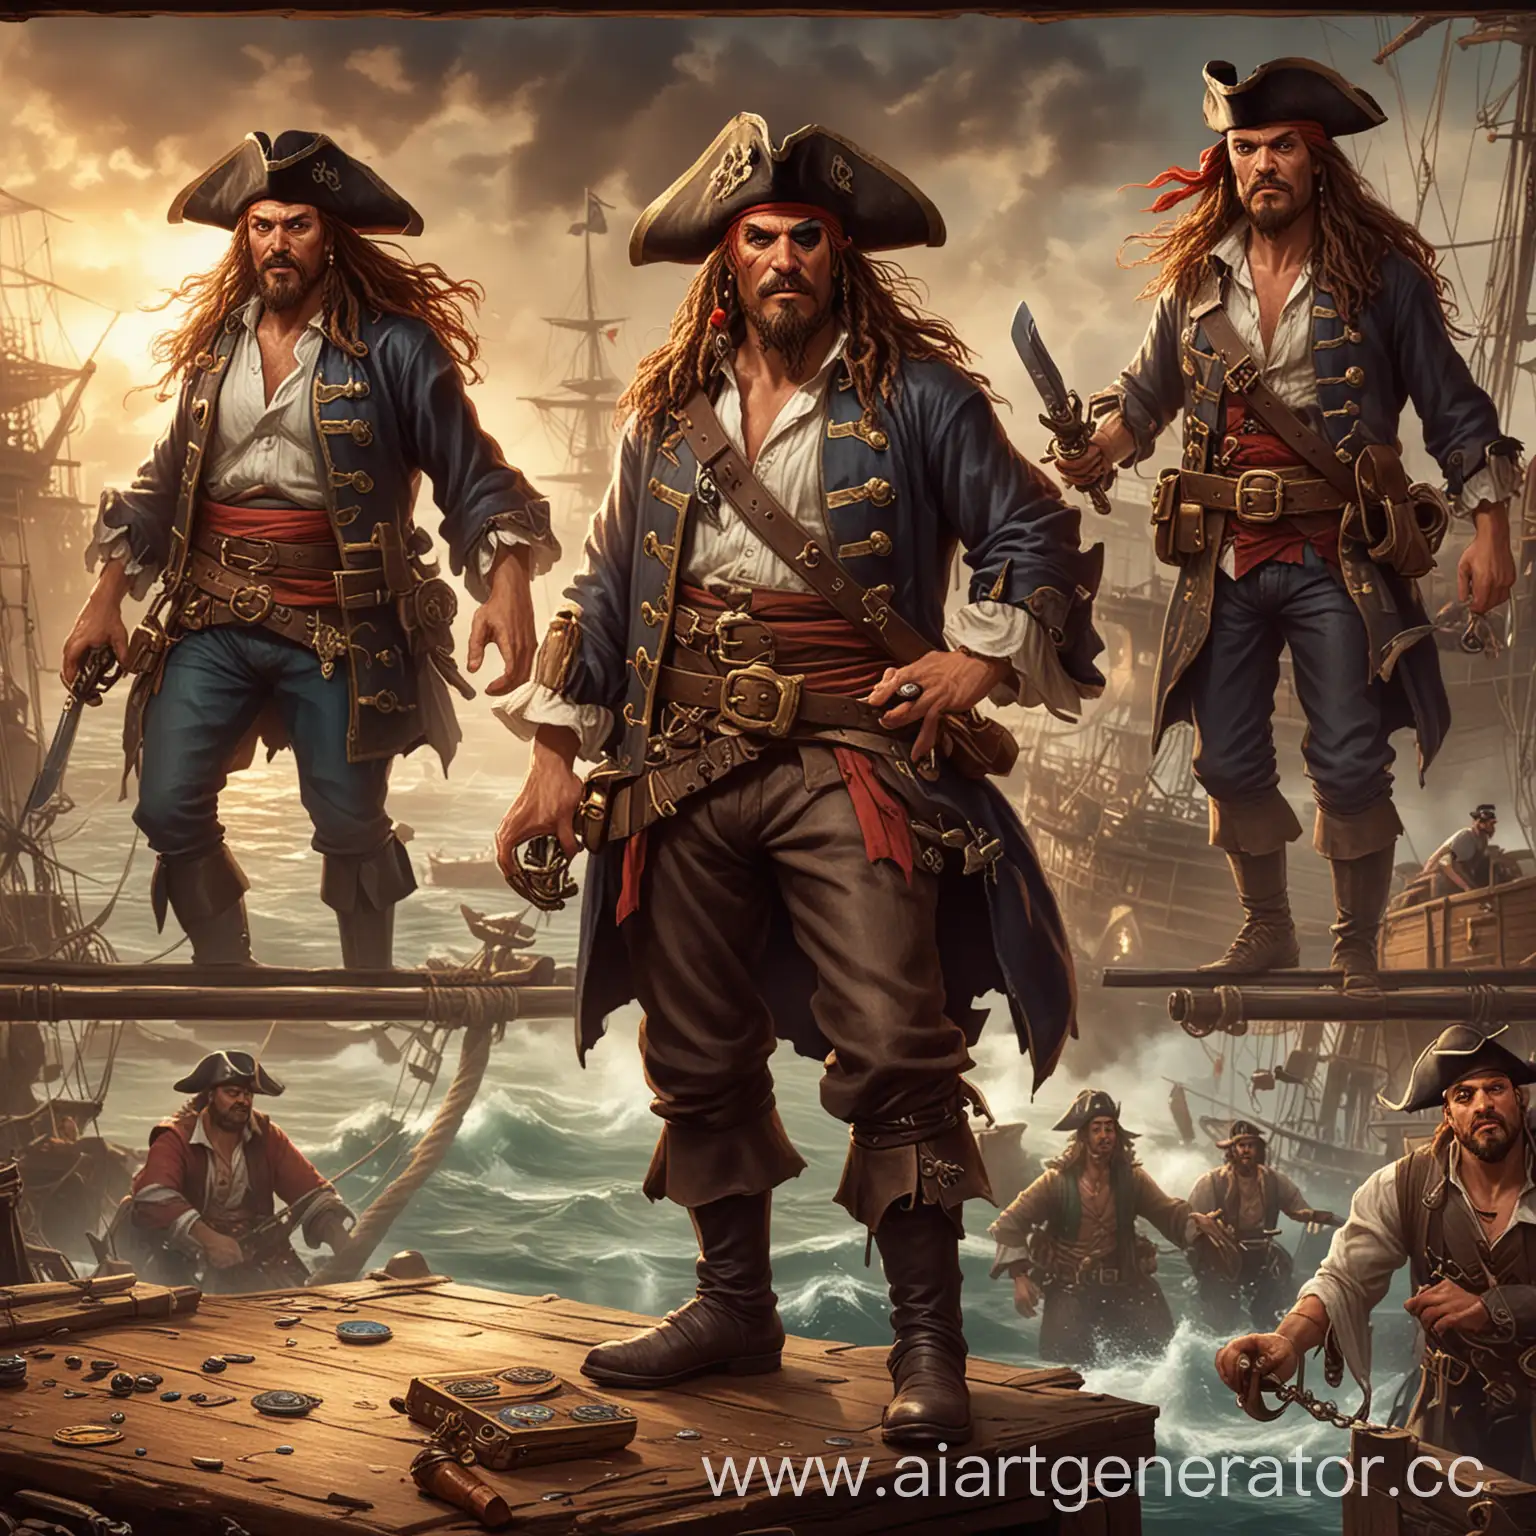 Vibrant-Pirate-Adventures-on-the-High-Seas-Board-Game-Illustrations